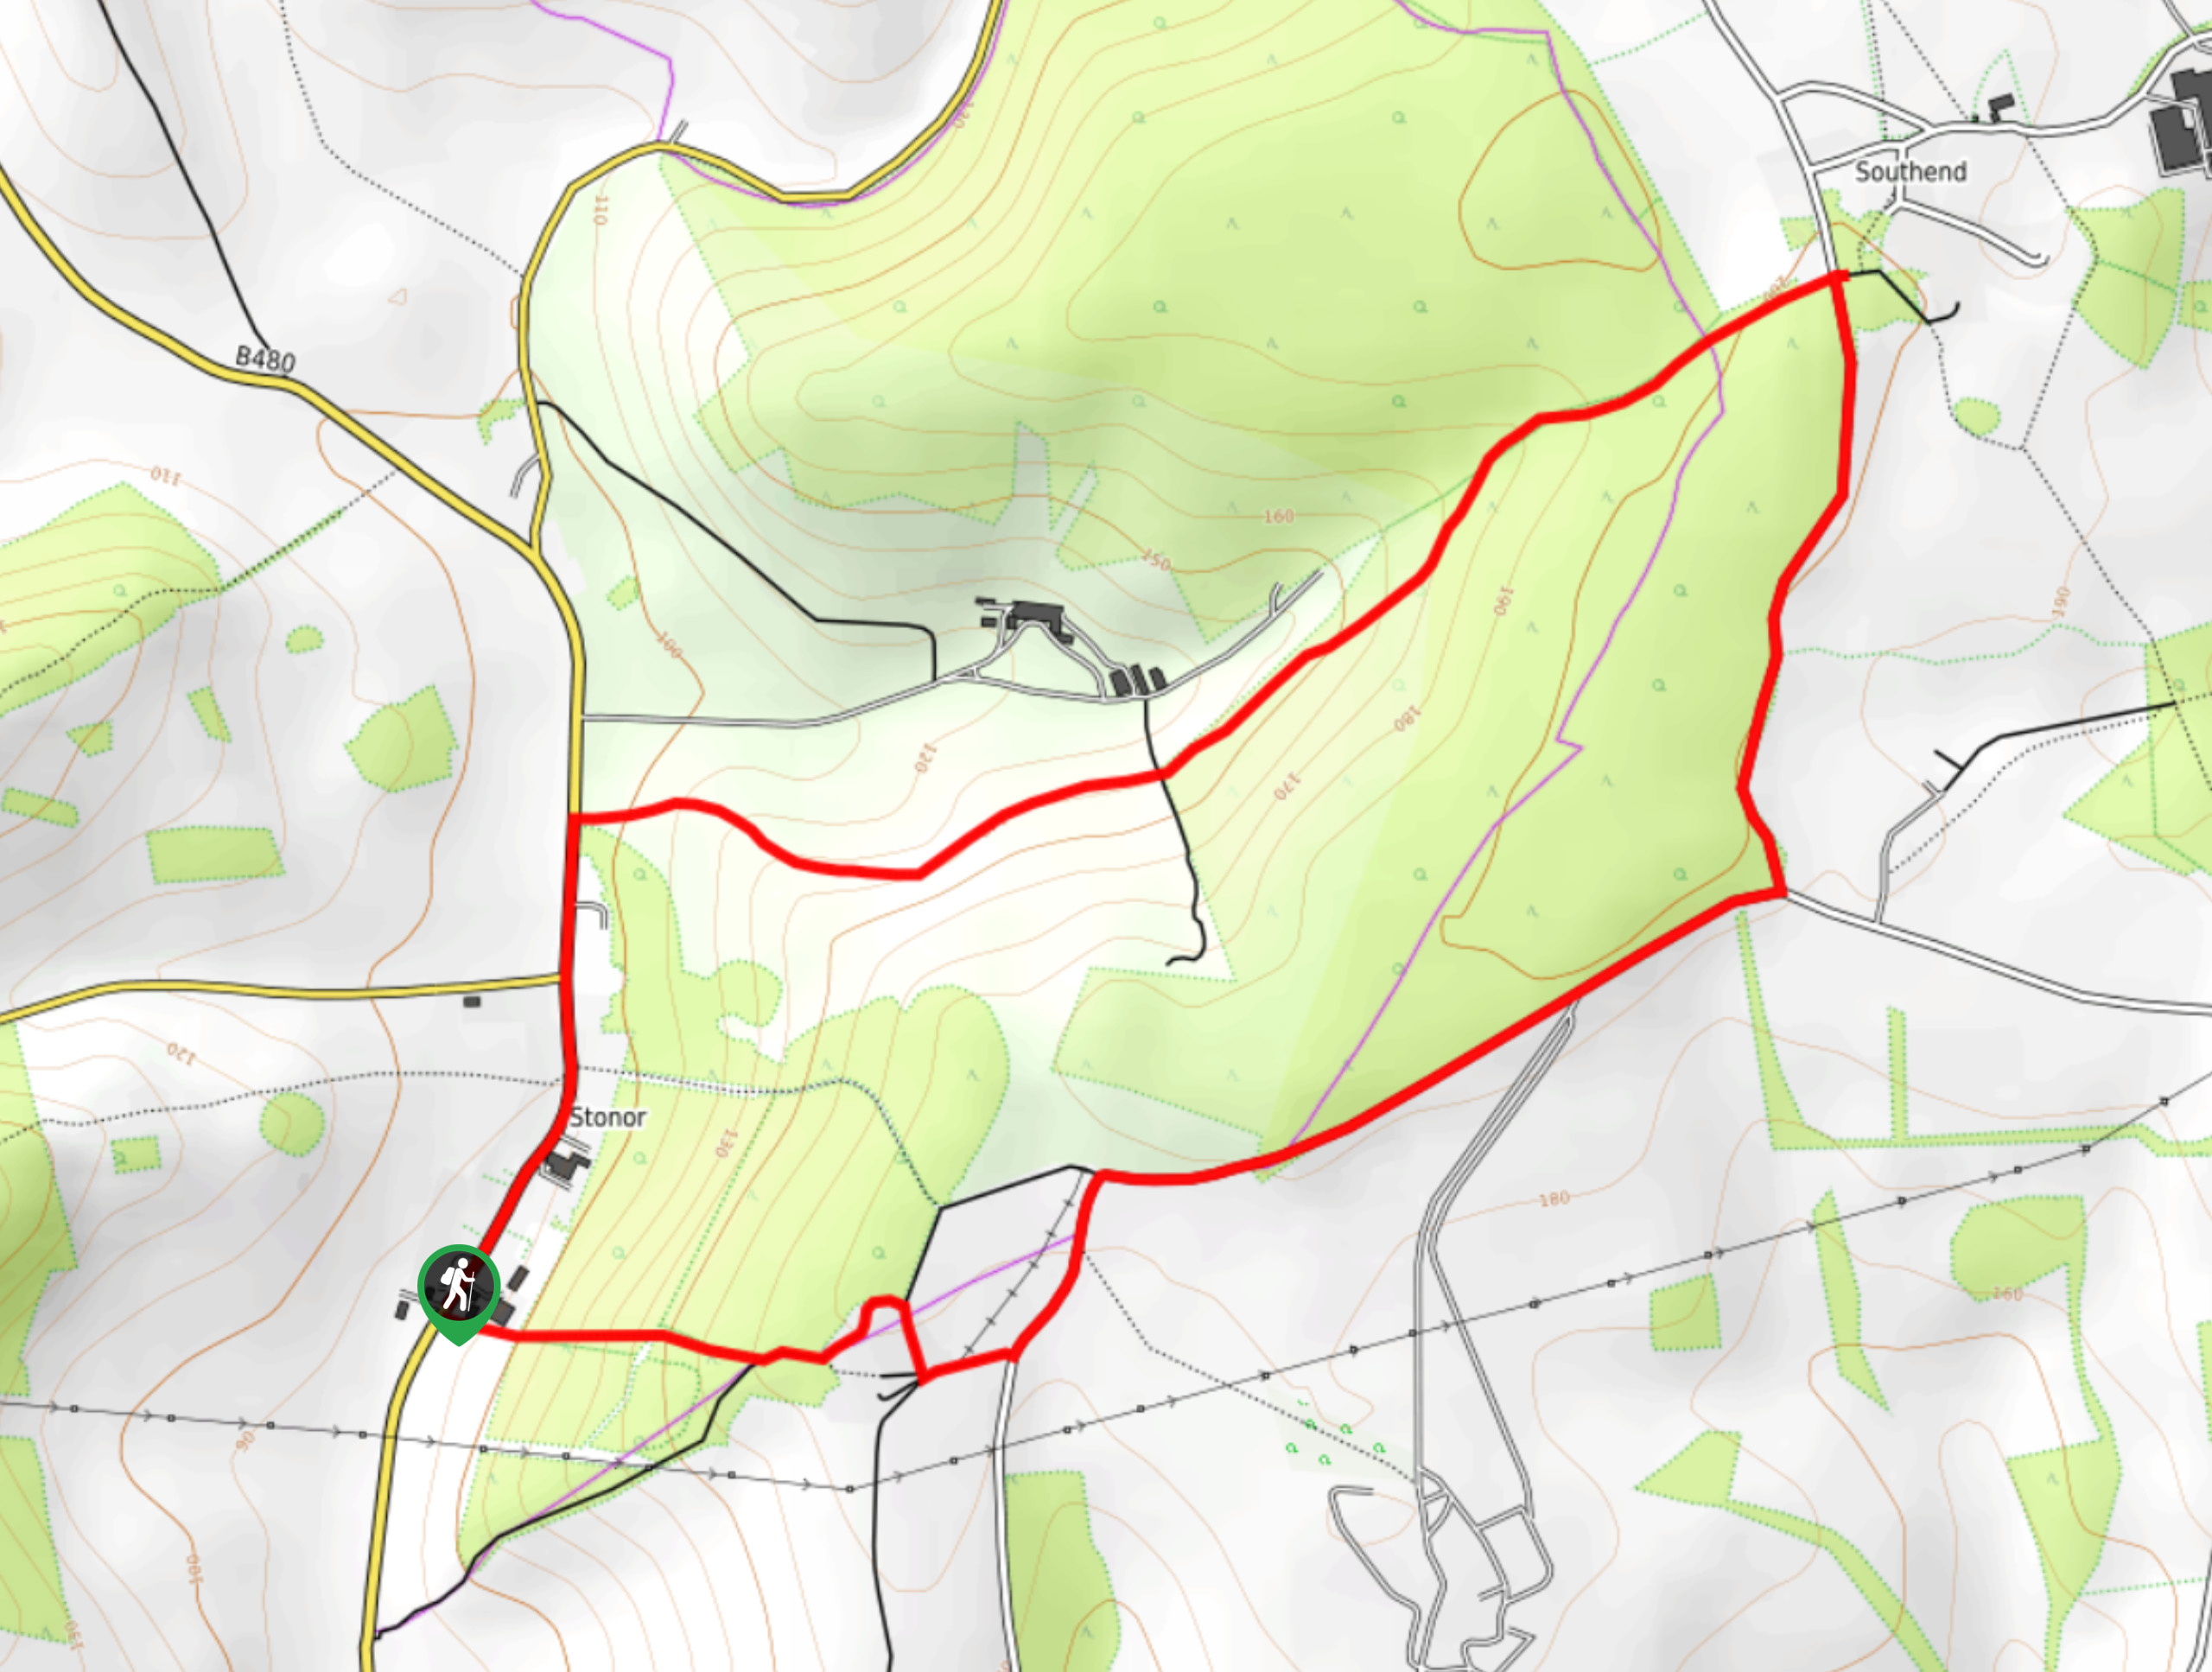 Almshill Wood and Stonor Park Walk Map